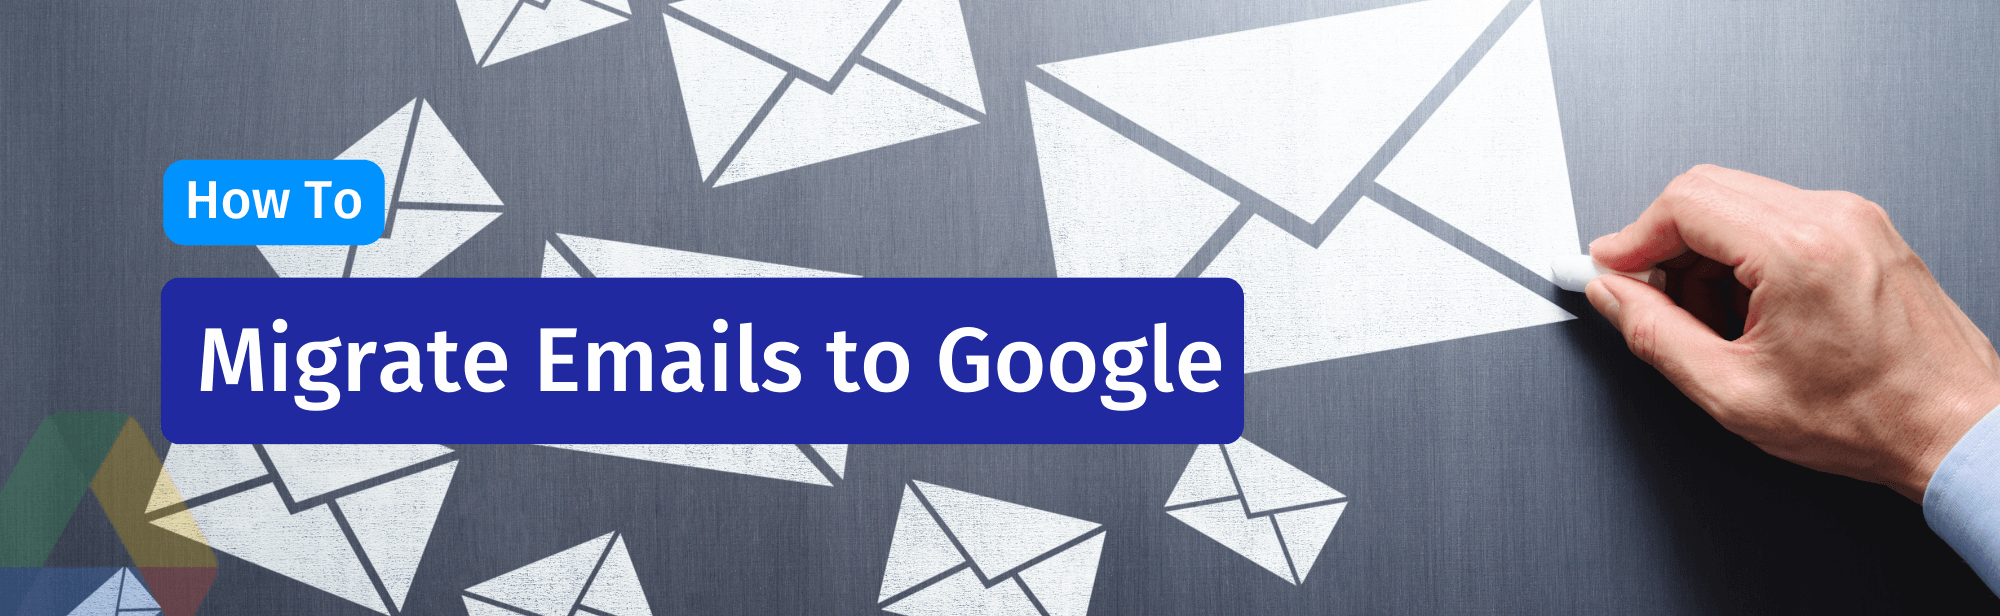 Hosting Email on Google: Migrate Emails to Google